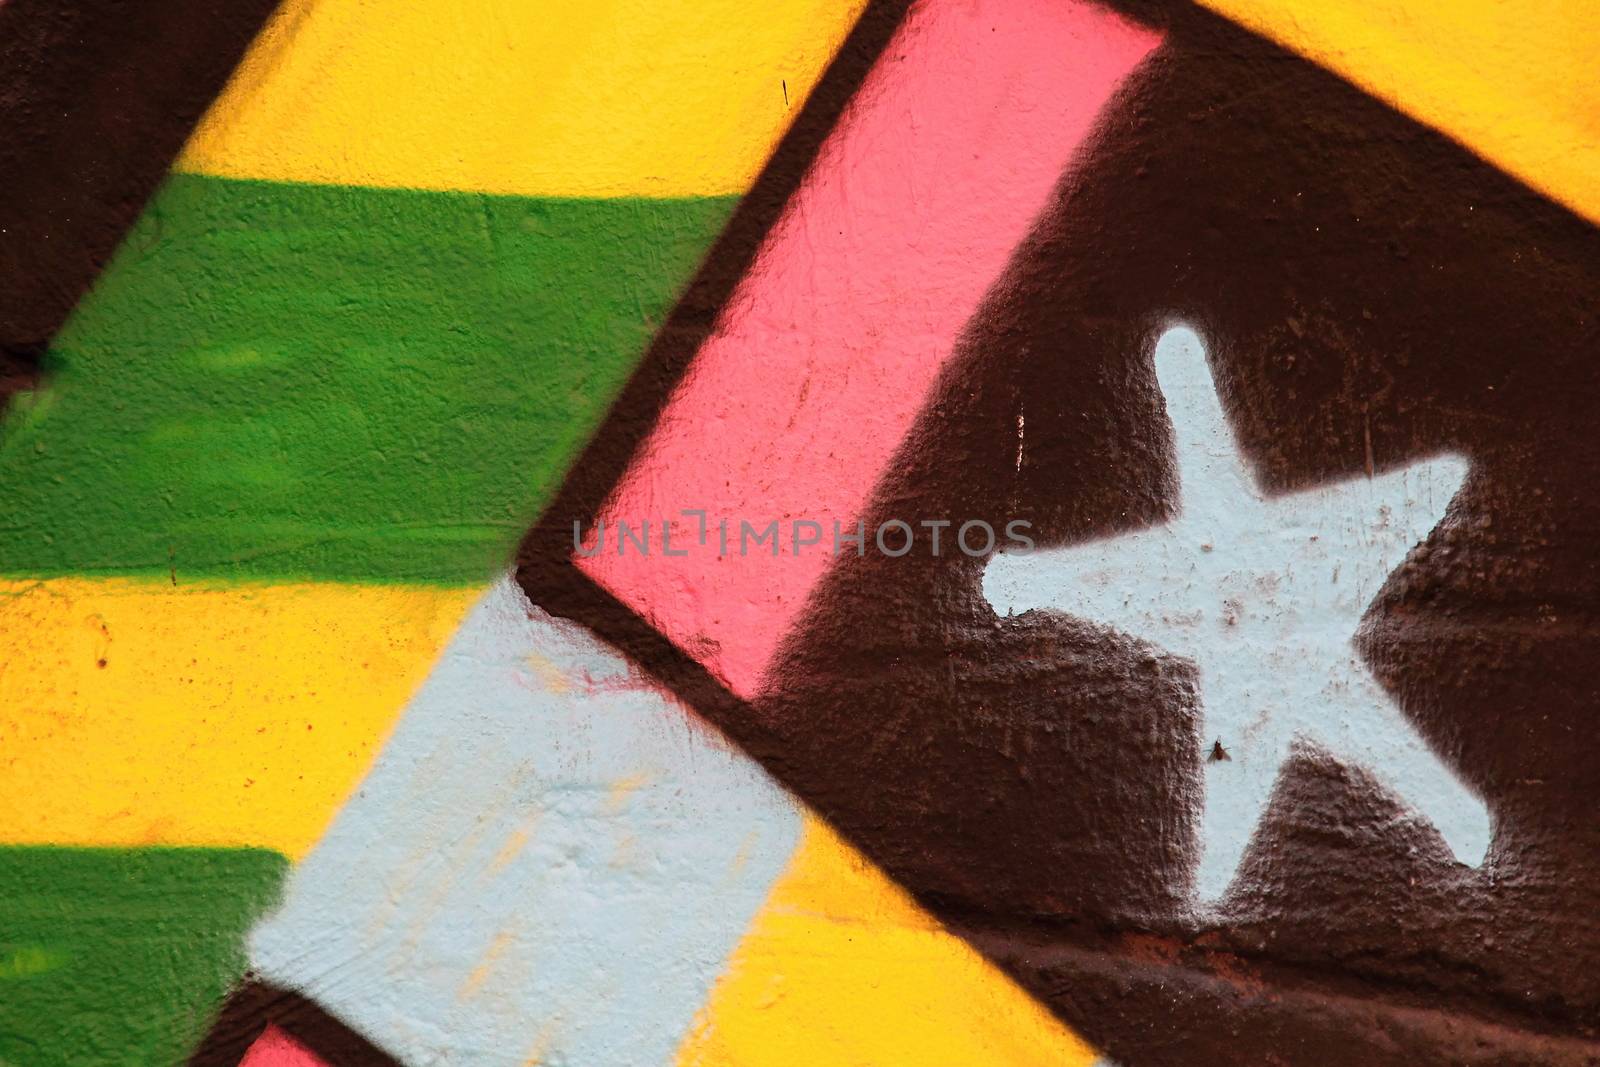 Colourful Graffiti Star on the Wall by Dermot68